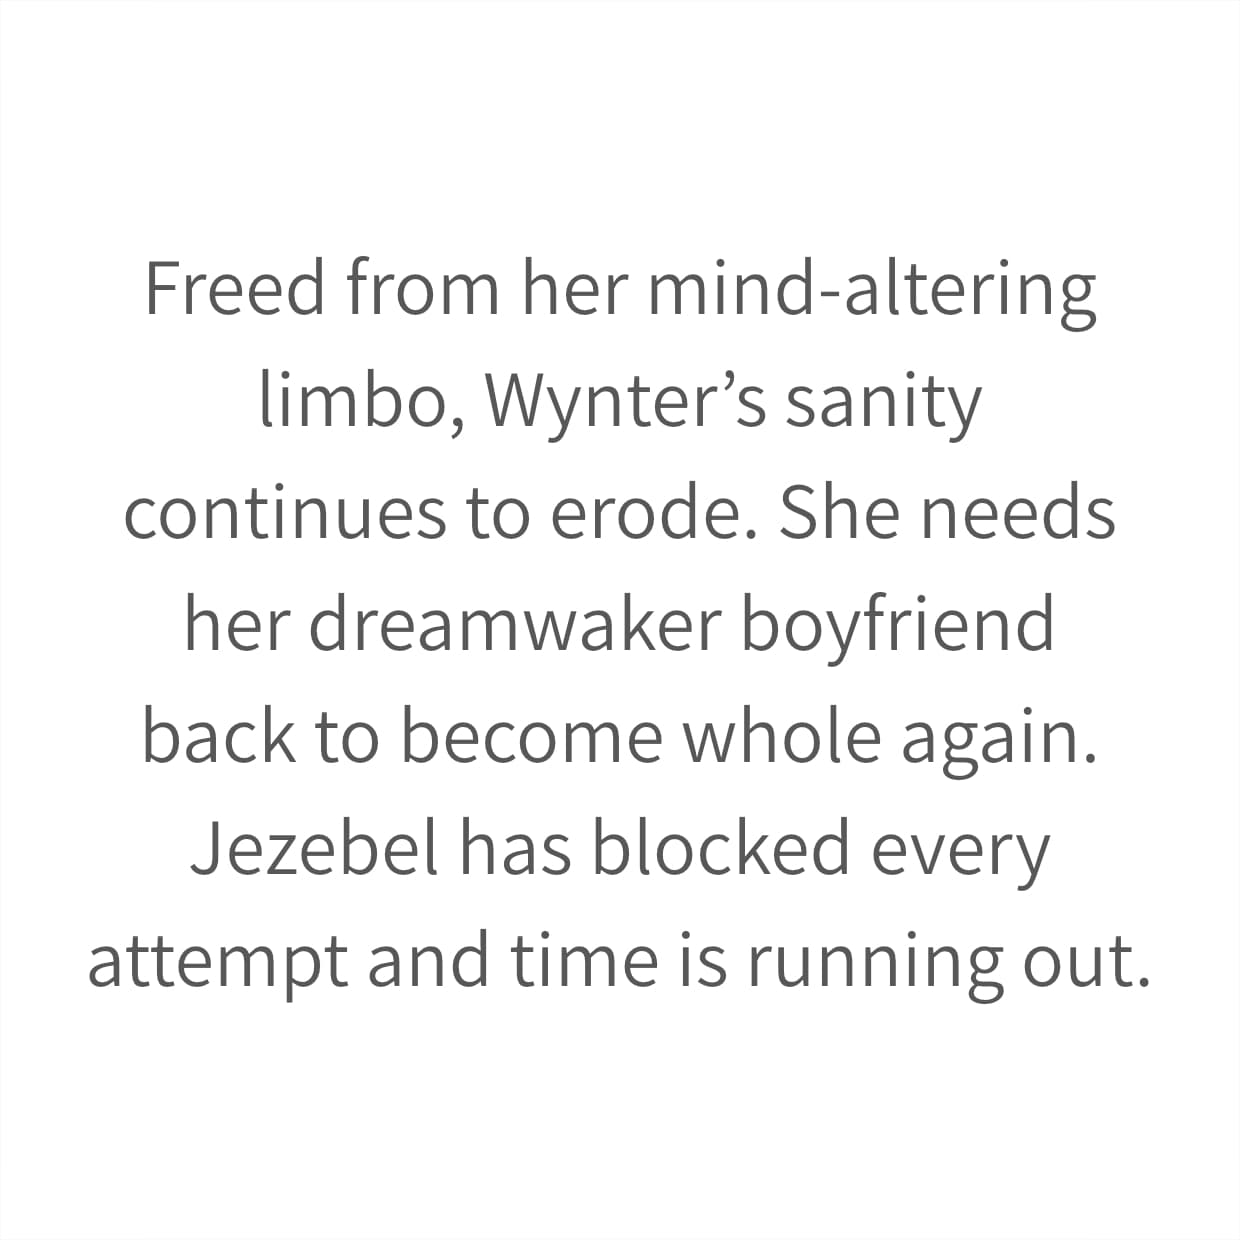 Freed from her mind-altering limbo, Wynter’s sanity continues to erode. She needs her dreamwaker boyfriend back to become whole again. Jezebel has blocked every attempt and time is running out.